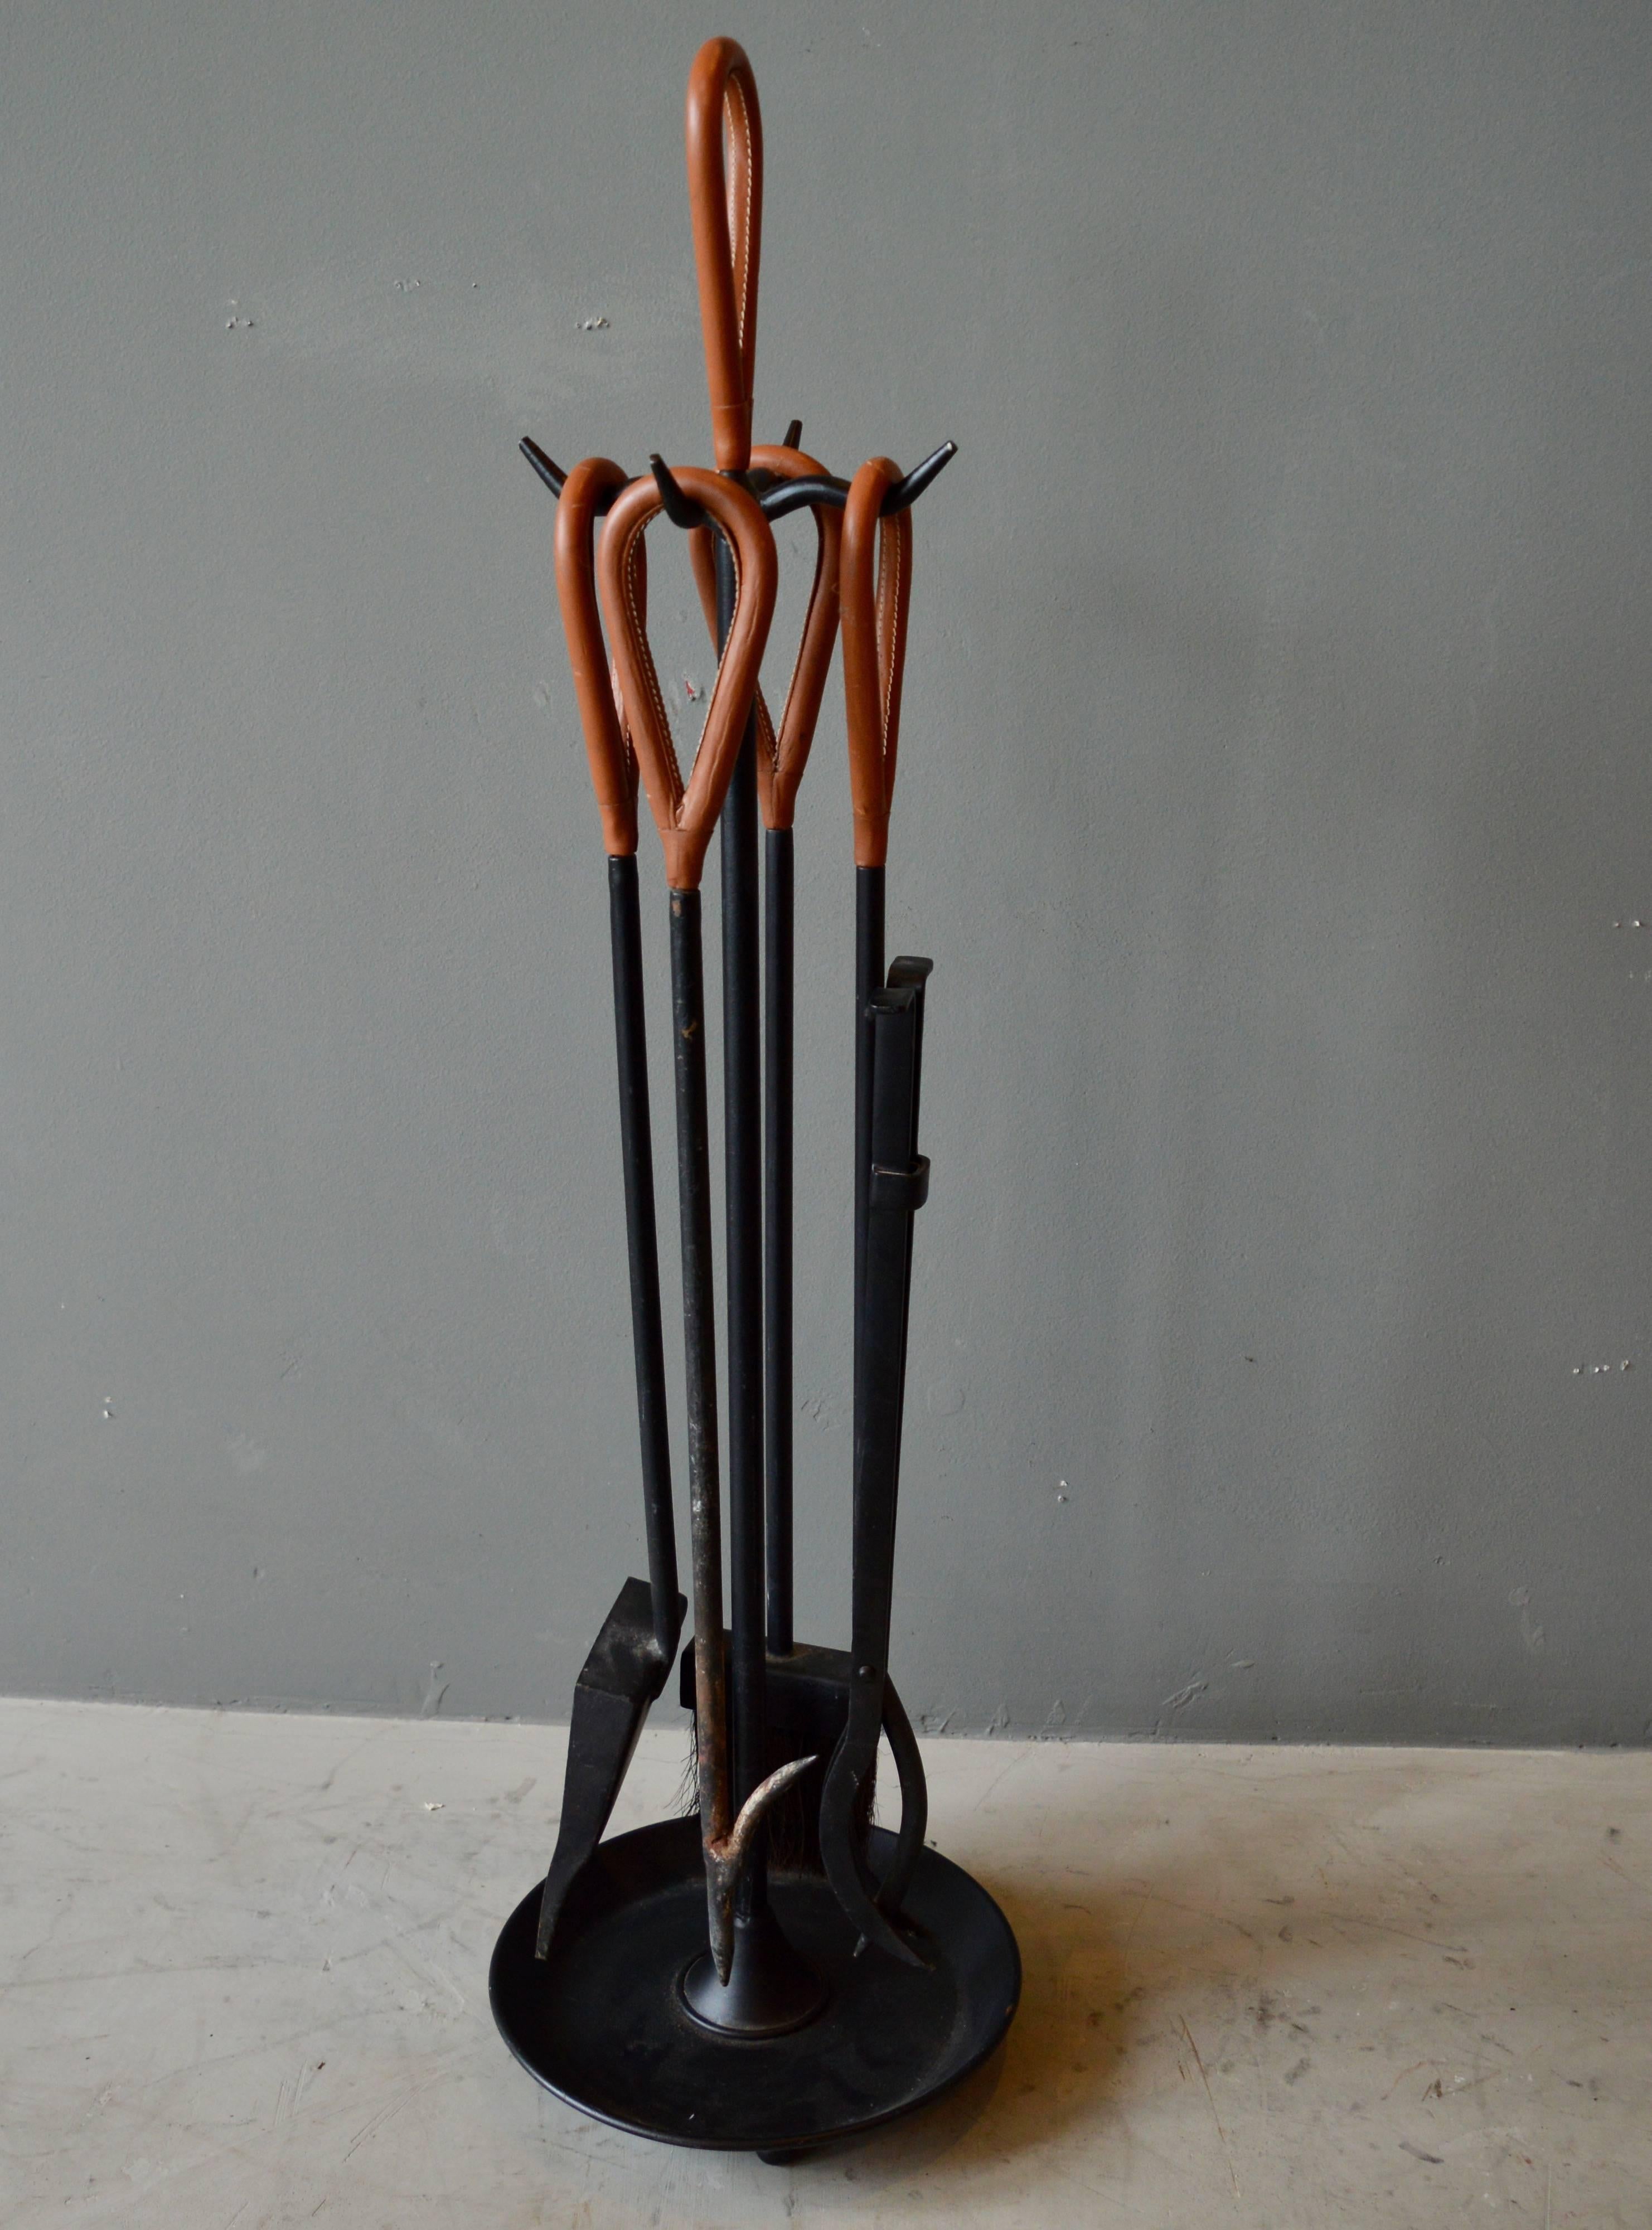 Gorgeous fireplace set in the style of Jacques Adnet. Iron frame with saddle leather wrapped handles. Fireplace set includes stand along with four tools, broom, dustpan, tongs and fire poker. Very good vintage condition.

Slightly darker colored set